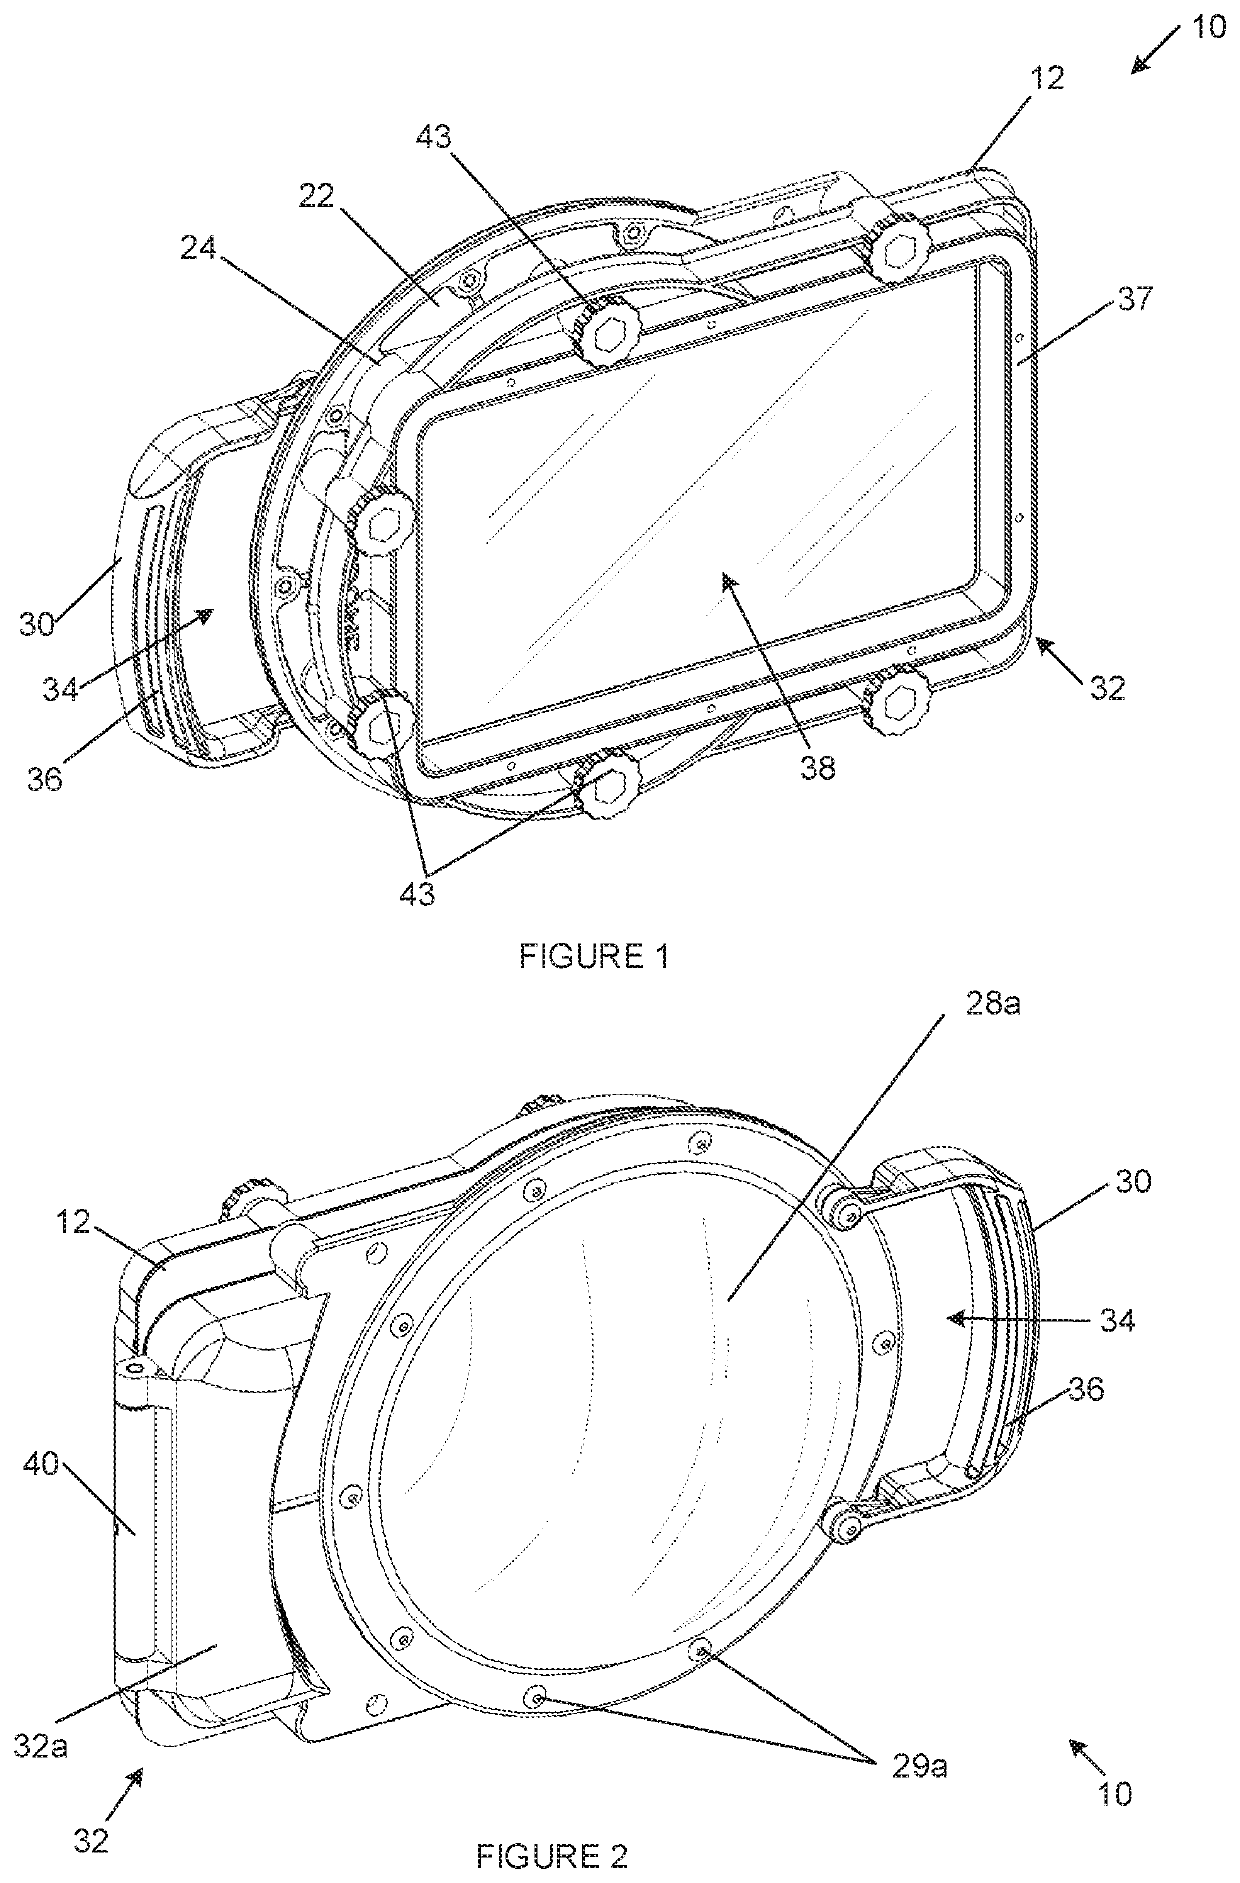 Underwater photography accessory for portable electronic device having camera lens